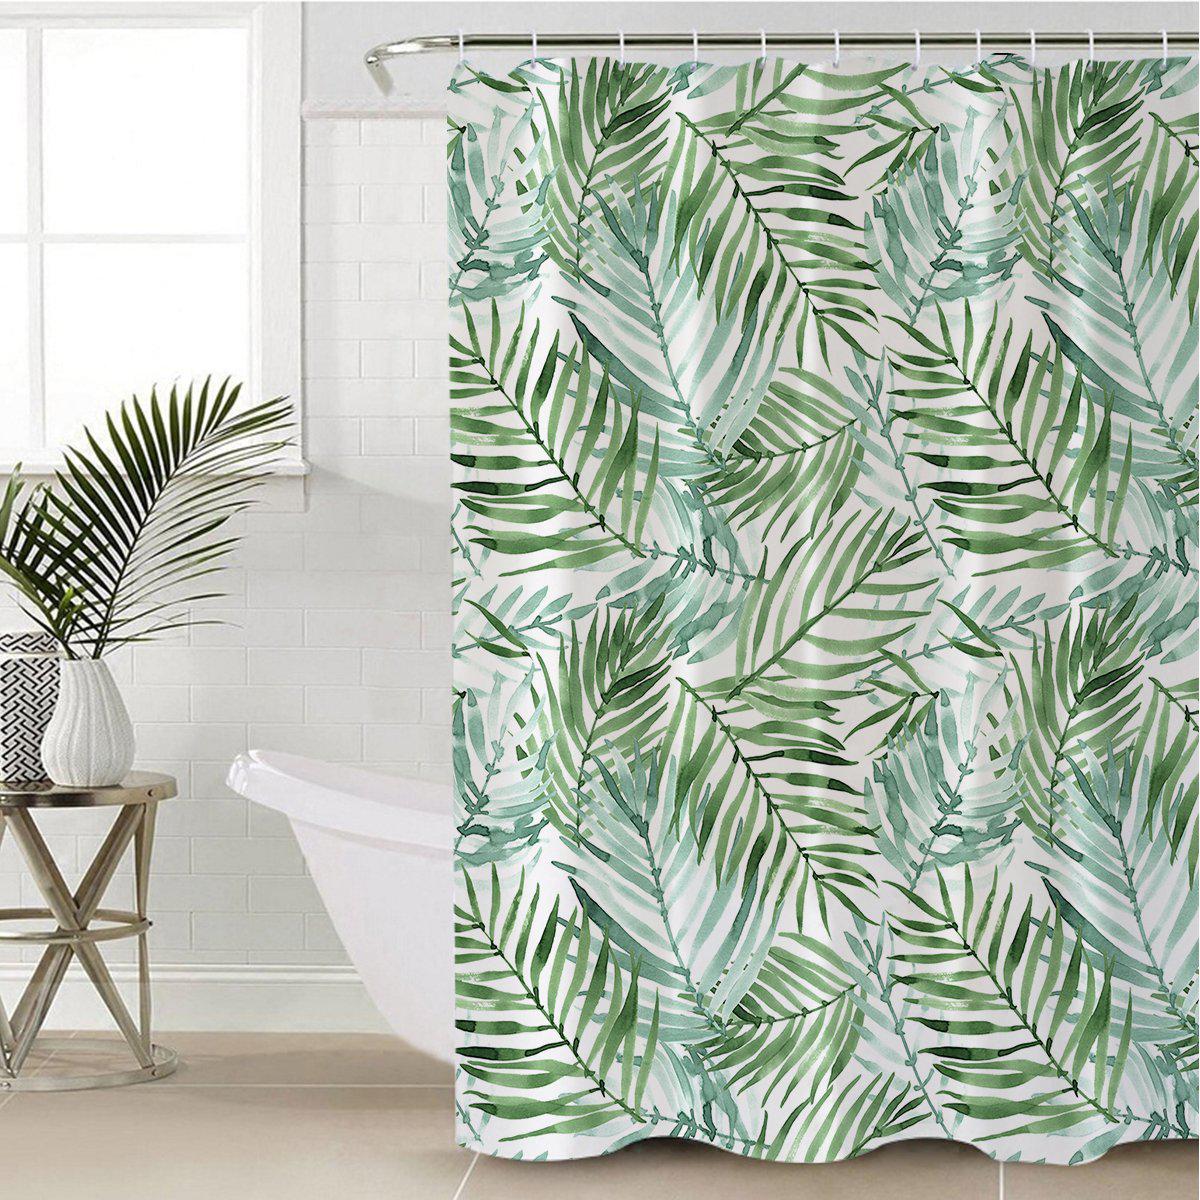 Palm Tree Wallpaper that will Make You Feel Like You're on Holiday! |  Wallsauce US